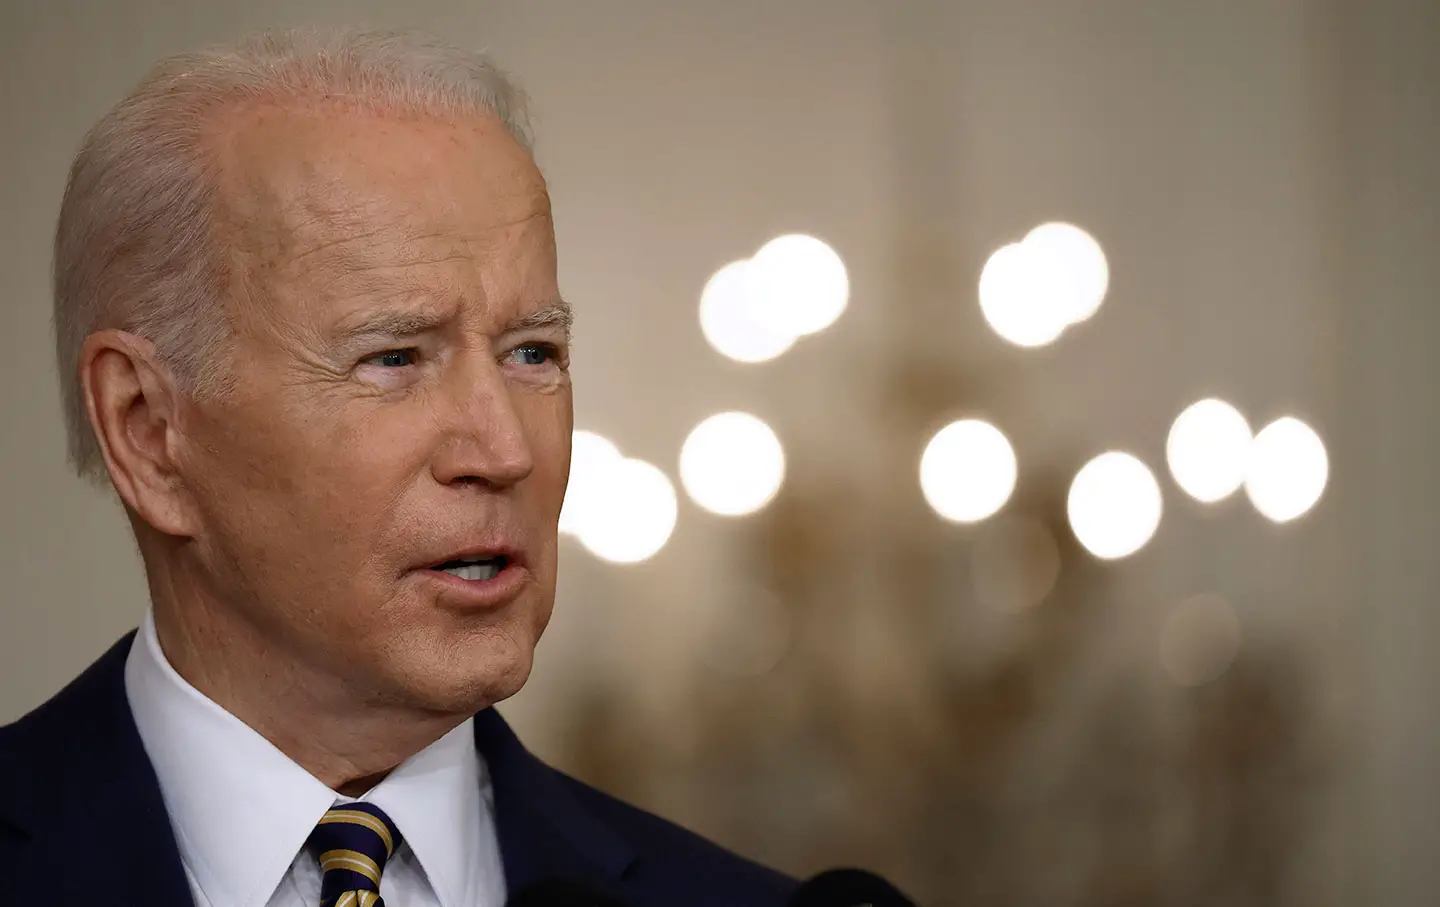 Biden Asks the Best Question: “What Are Republicans For?”